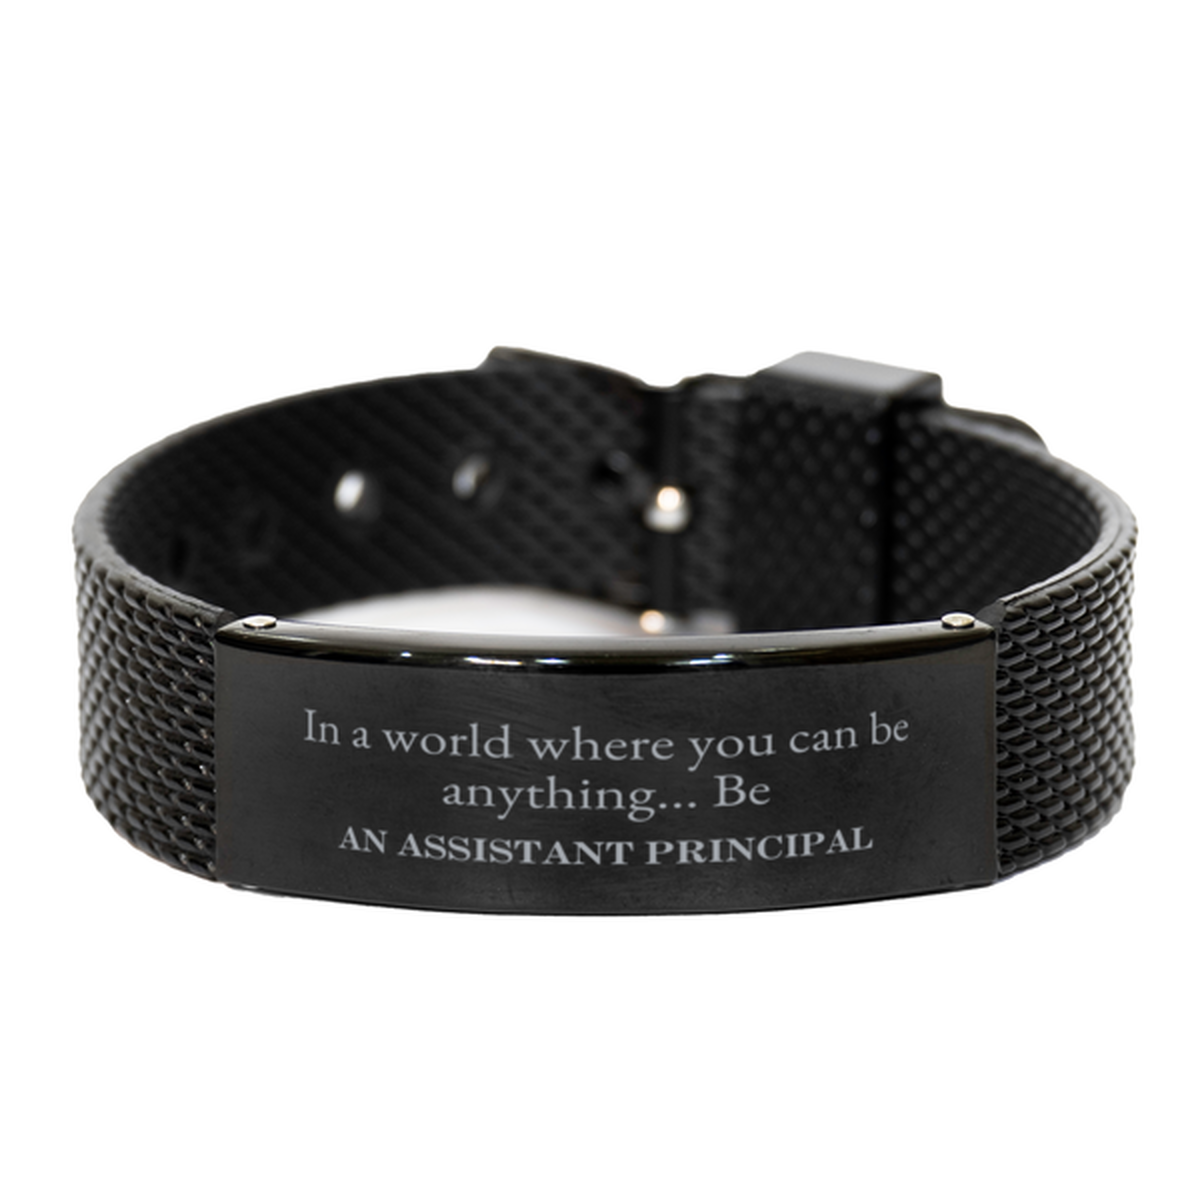 Gifts for Assistant Principal, In a world where you can be anything, Appreciation Birthday Black Shark Mesh Bracelet for Men, Women, Friends, Coworkers